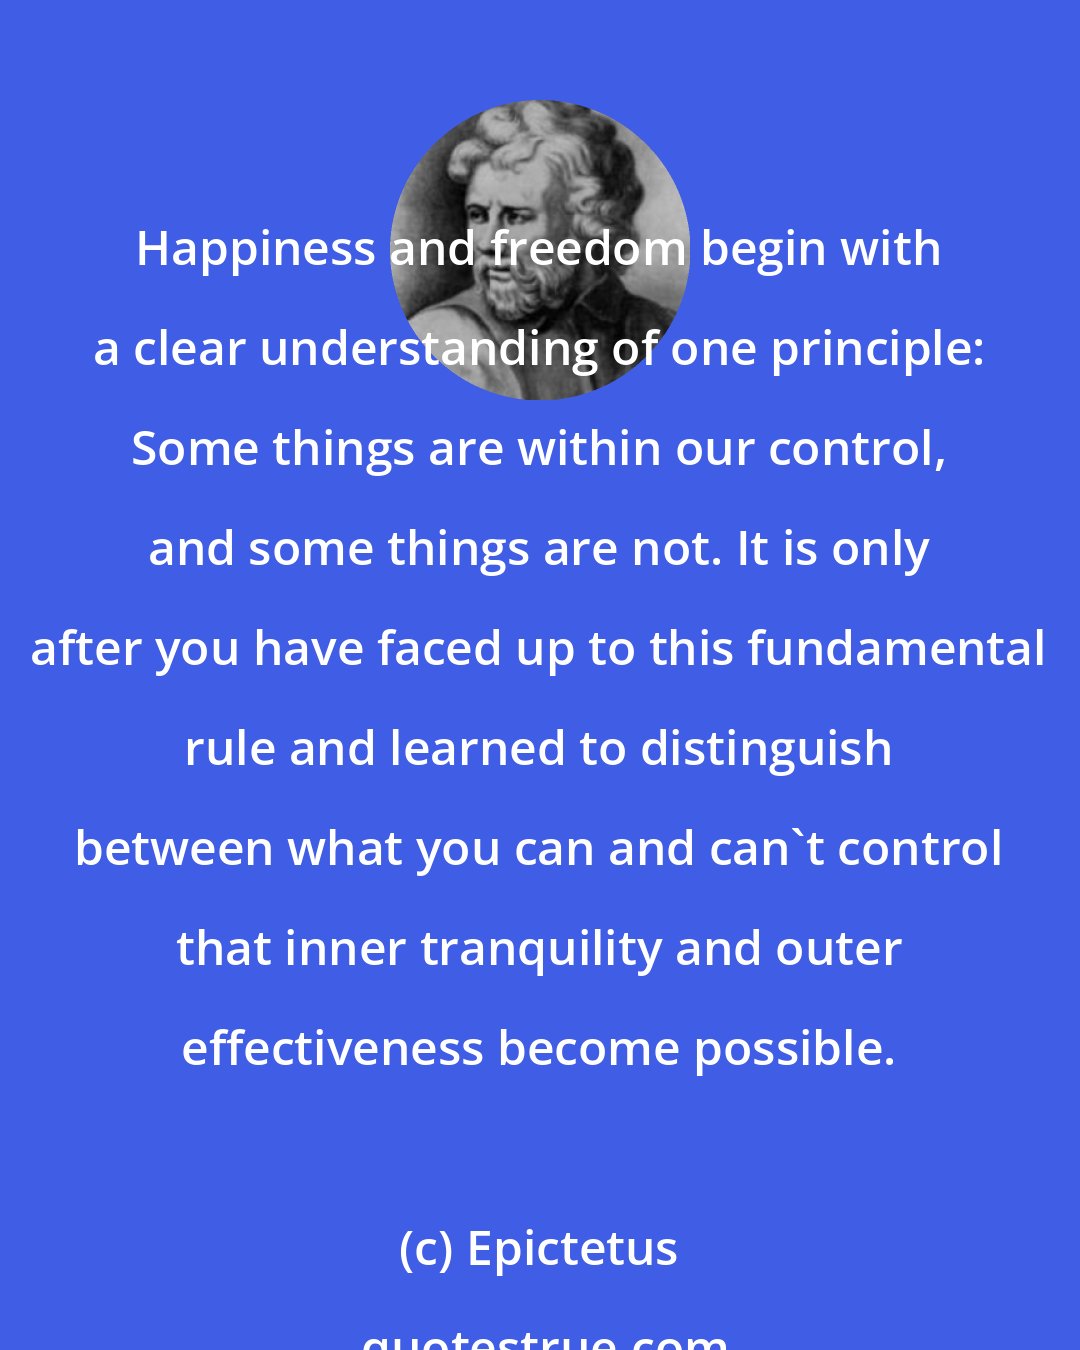 Epictetus: Happiness and freedom begin with a clear understanding of one principle: Some things are within our control, and some things are not. It is only after you have faced up to this fundamental rule and learned to distinguish between what you can and can't control that inner tranquility and outer effectiveness become possible.